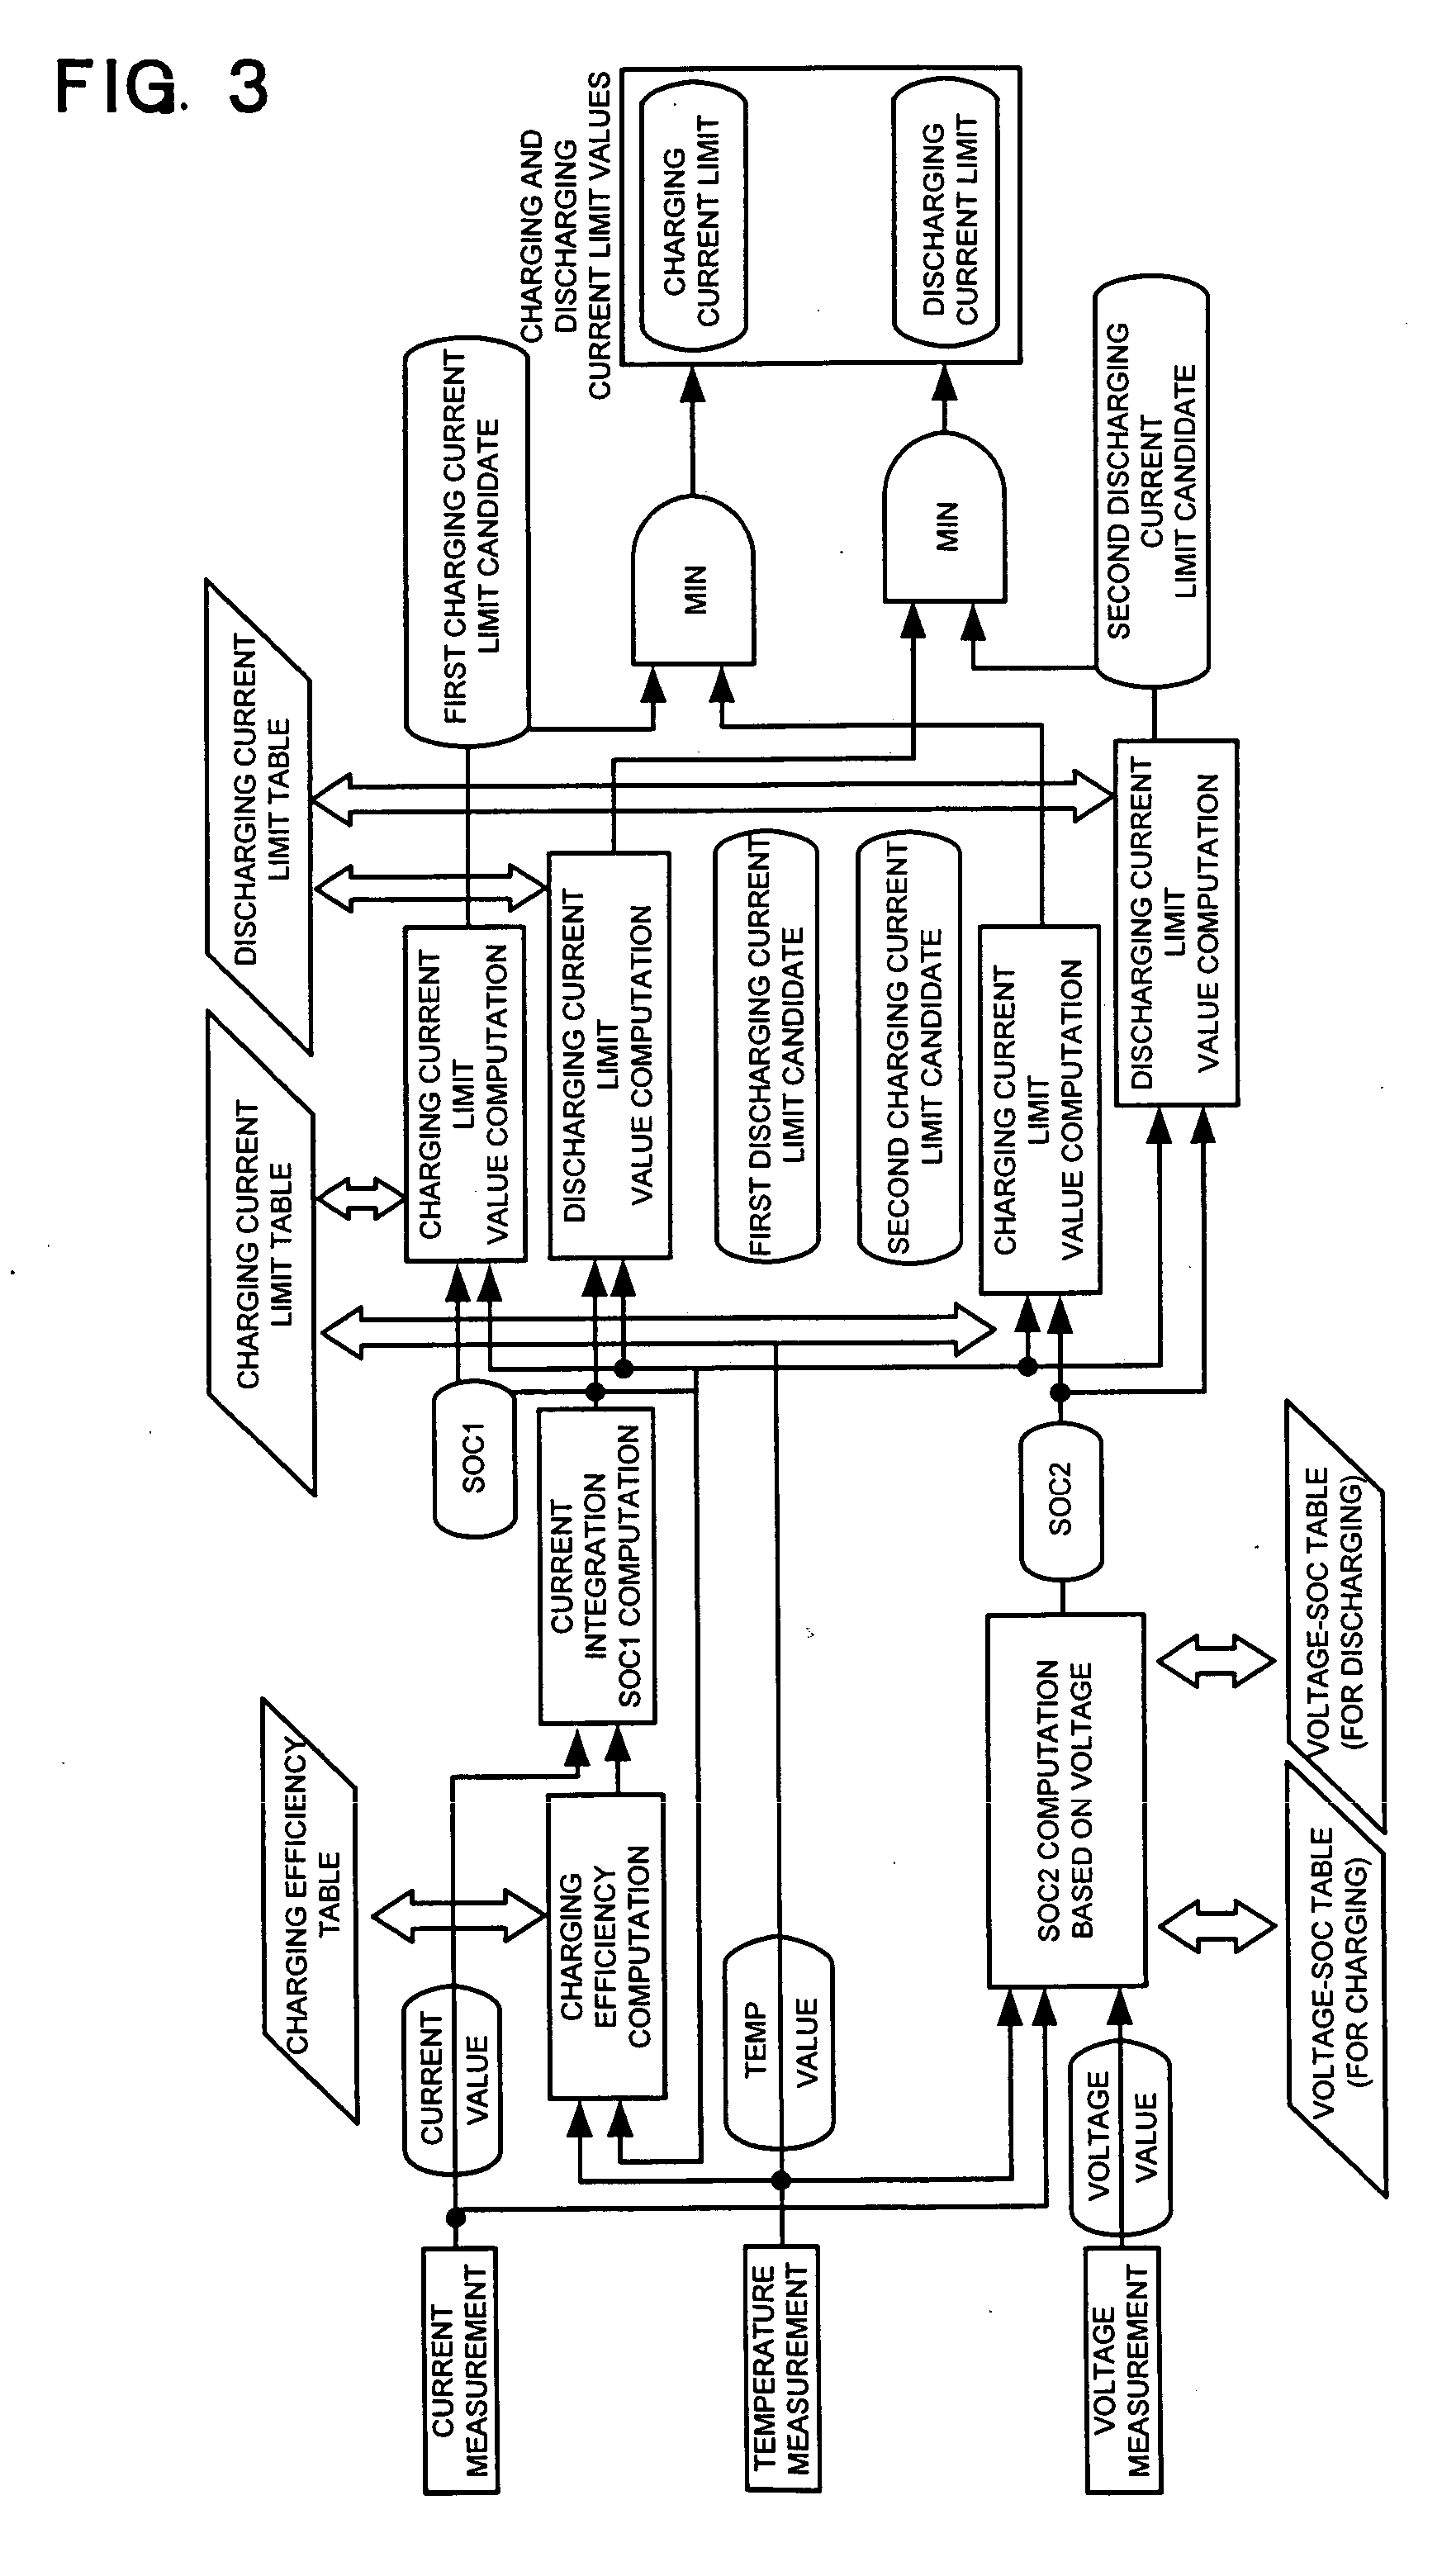 Method of controlling battery current limiting